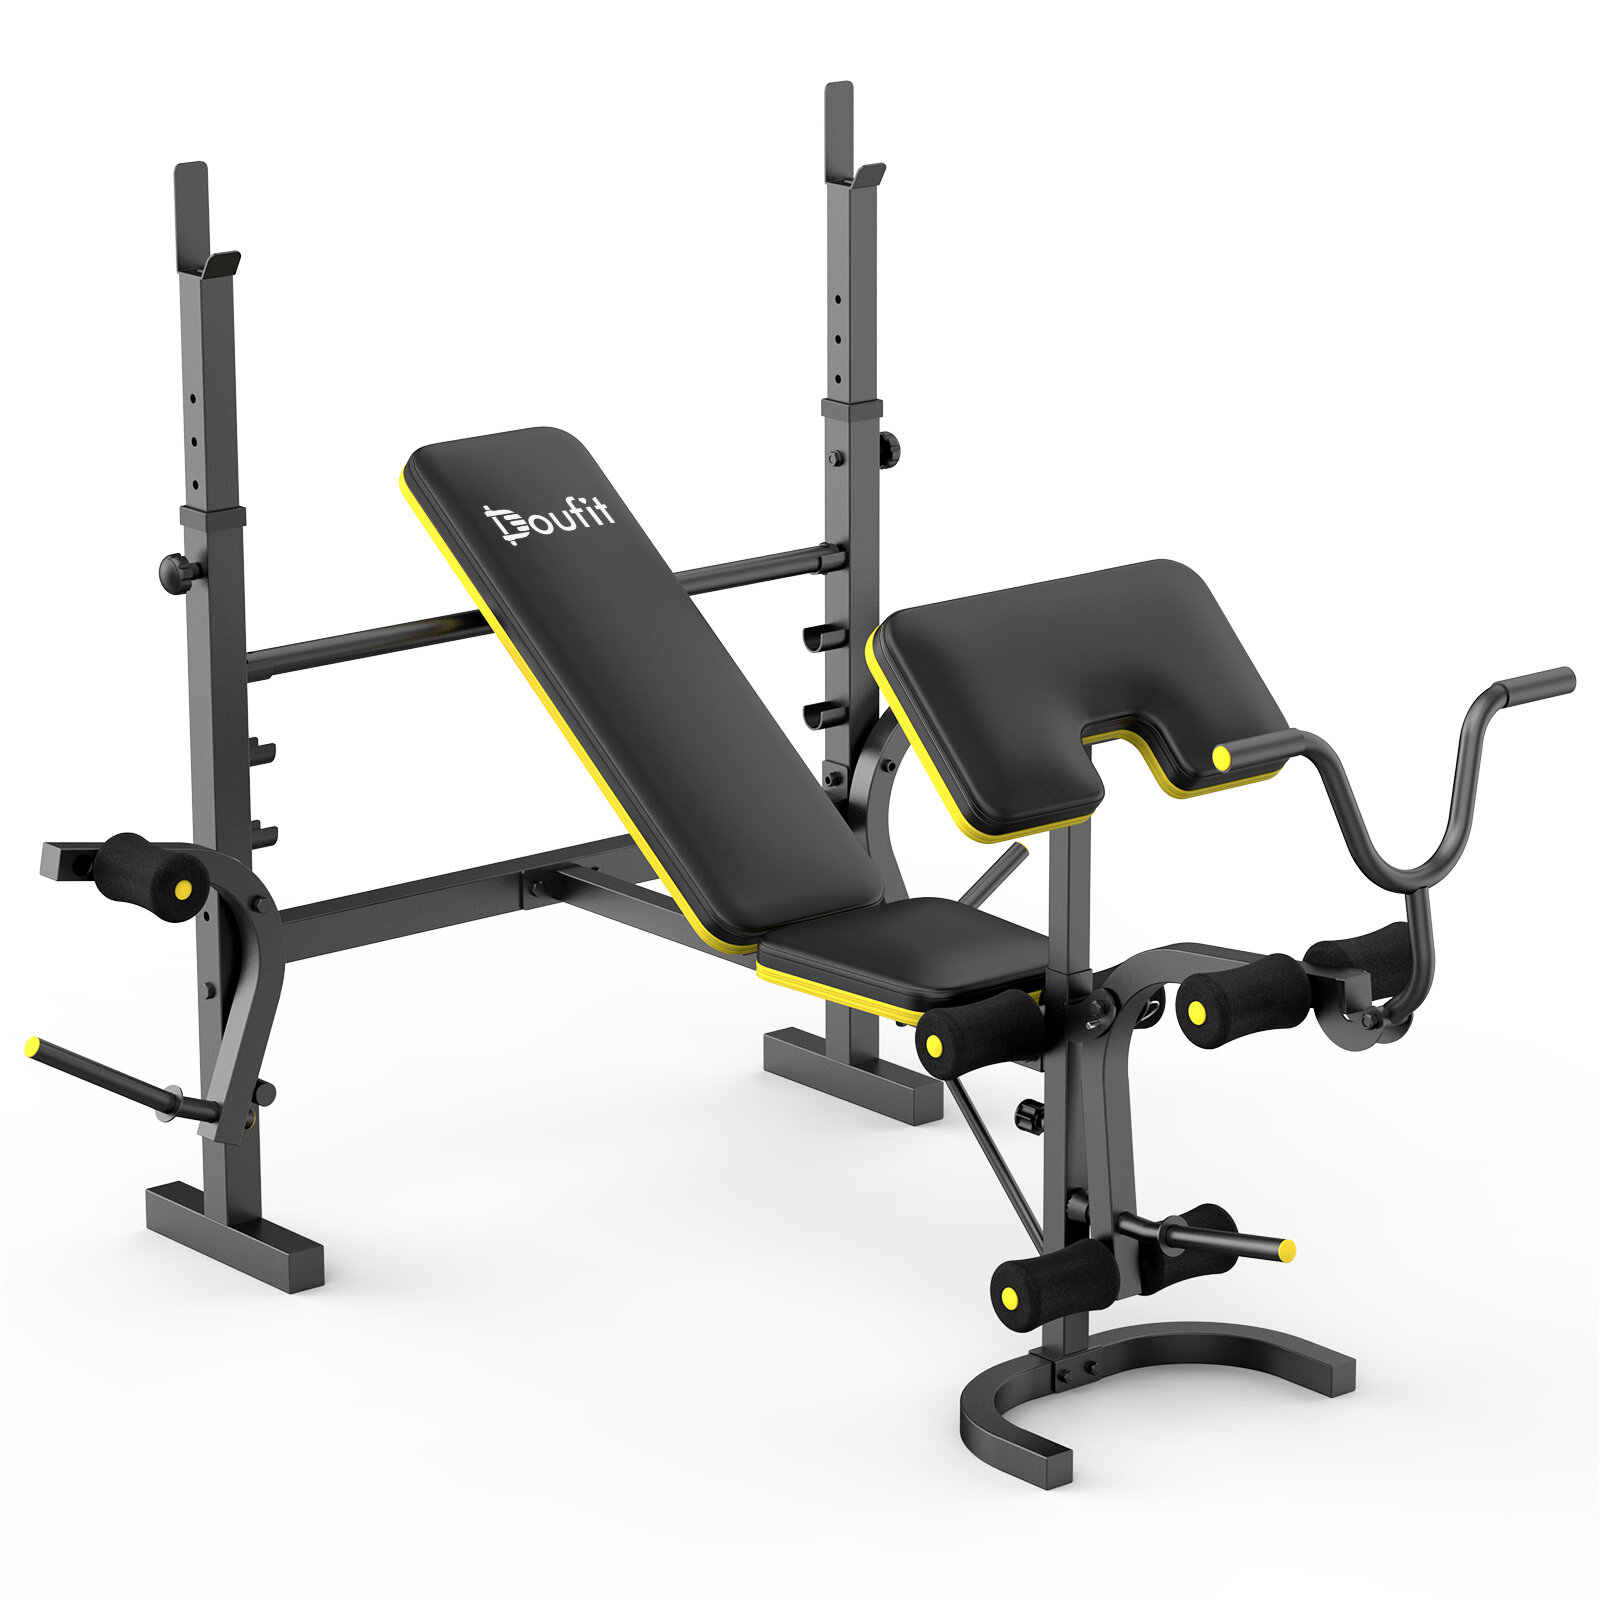 Doufit WB-07 Weight Bench 270kg Load Capacity 4-in-1 Multifunctional Sit Up Benches 15 Position Adjustment Multi-role Folding Sport Fitness Equipment